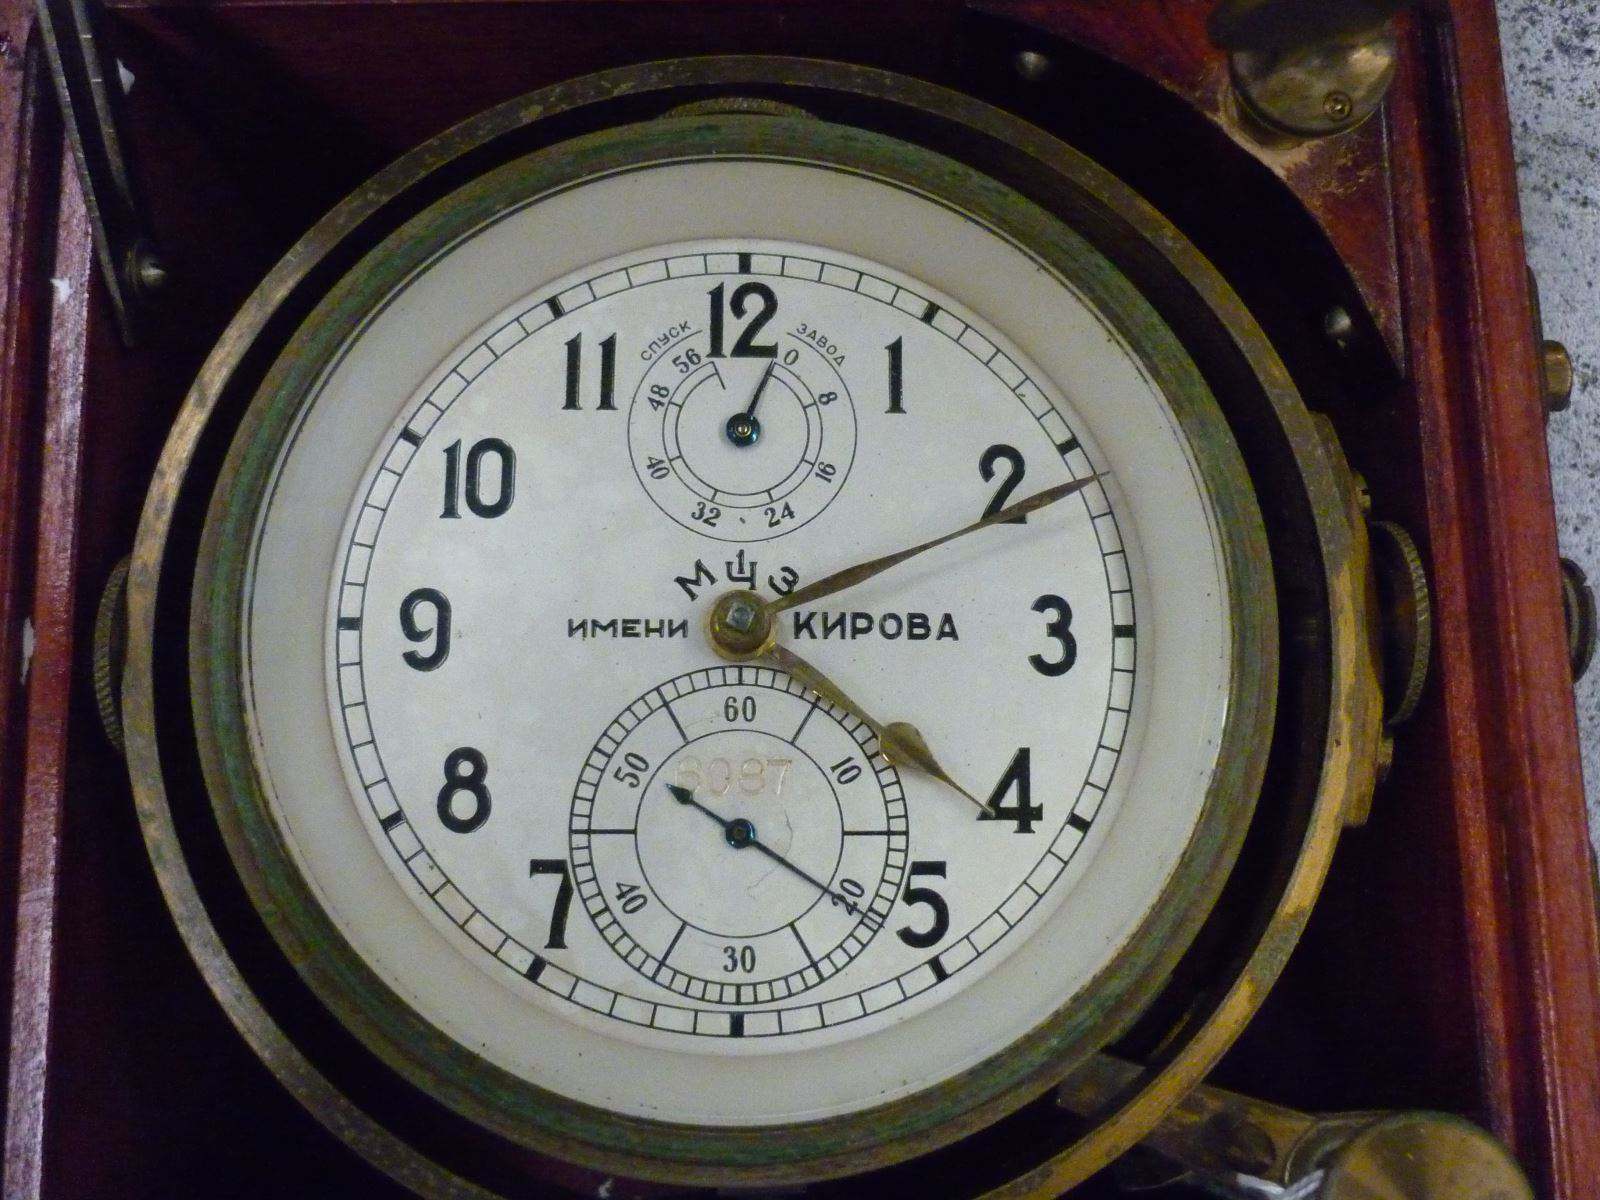 Ships Chronometer. Russian. Working Order